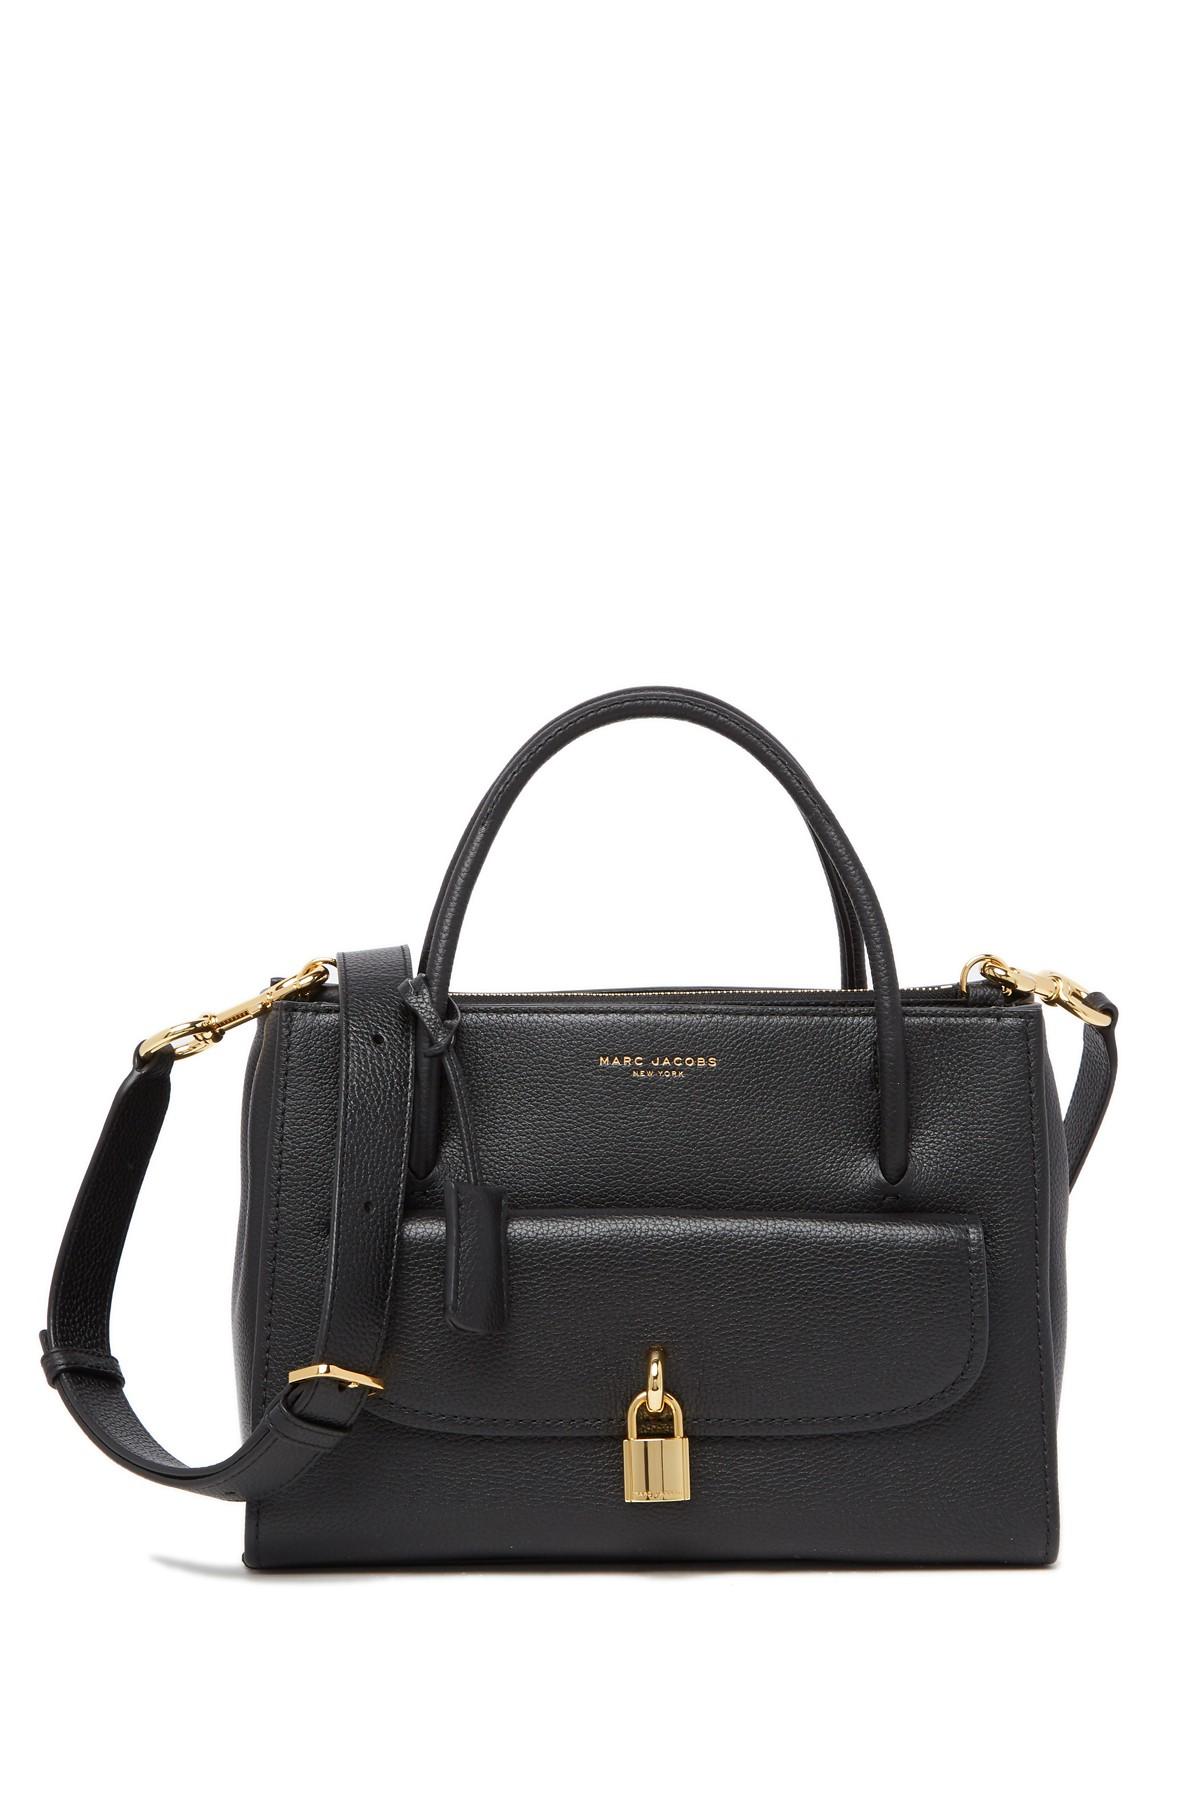 MARC JACOBS #30219 Black Saffiano Leather Tote